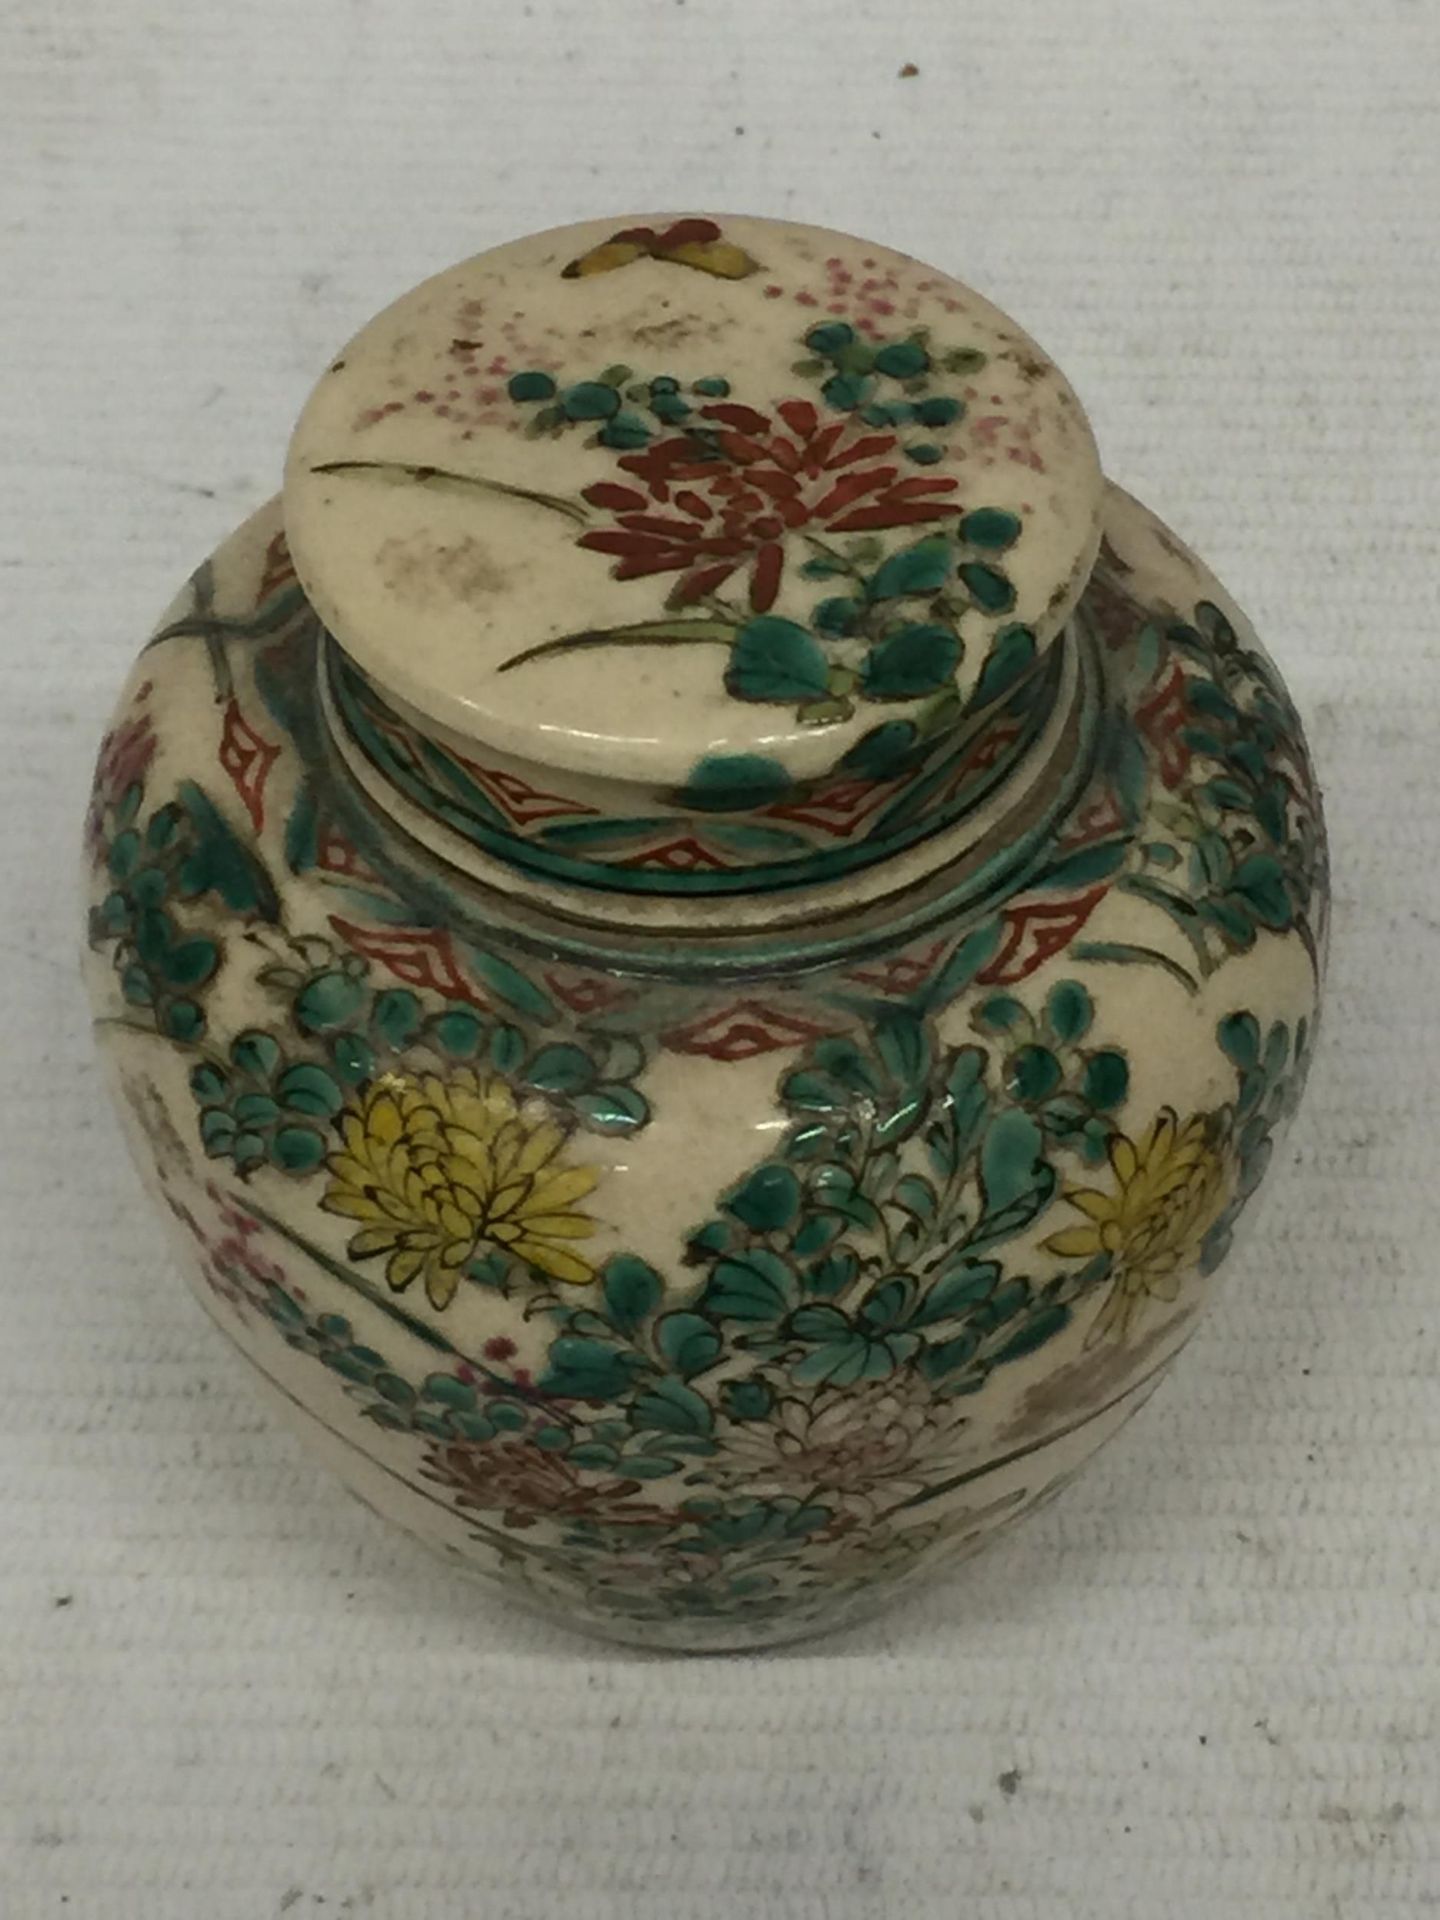 A JAPANESE STONEWARE LIDDED SMALL POT POURRI / GINGER JAR WITH BIRD AND FLORAL DESIGN AND INNDER LID - Image 4 of 7